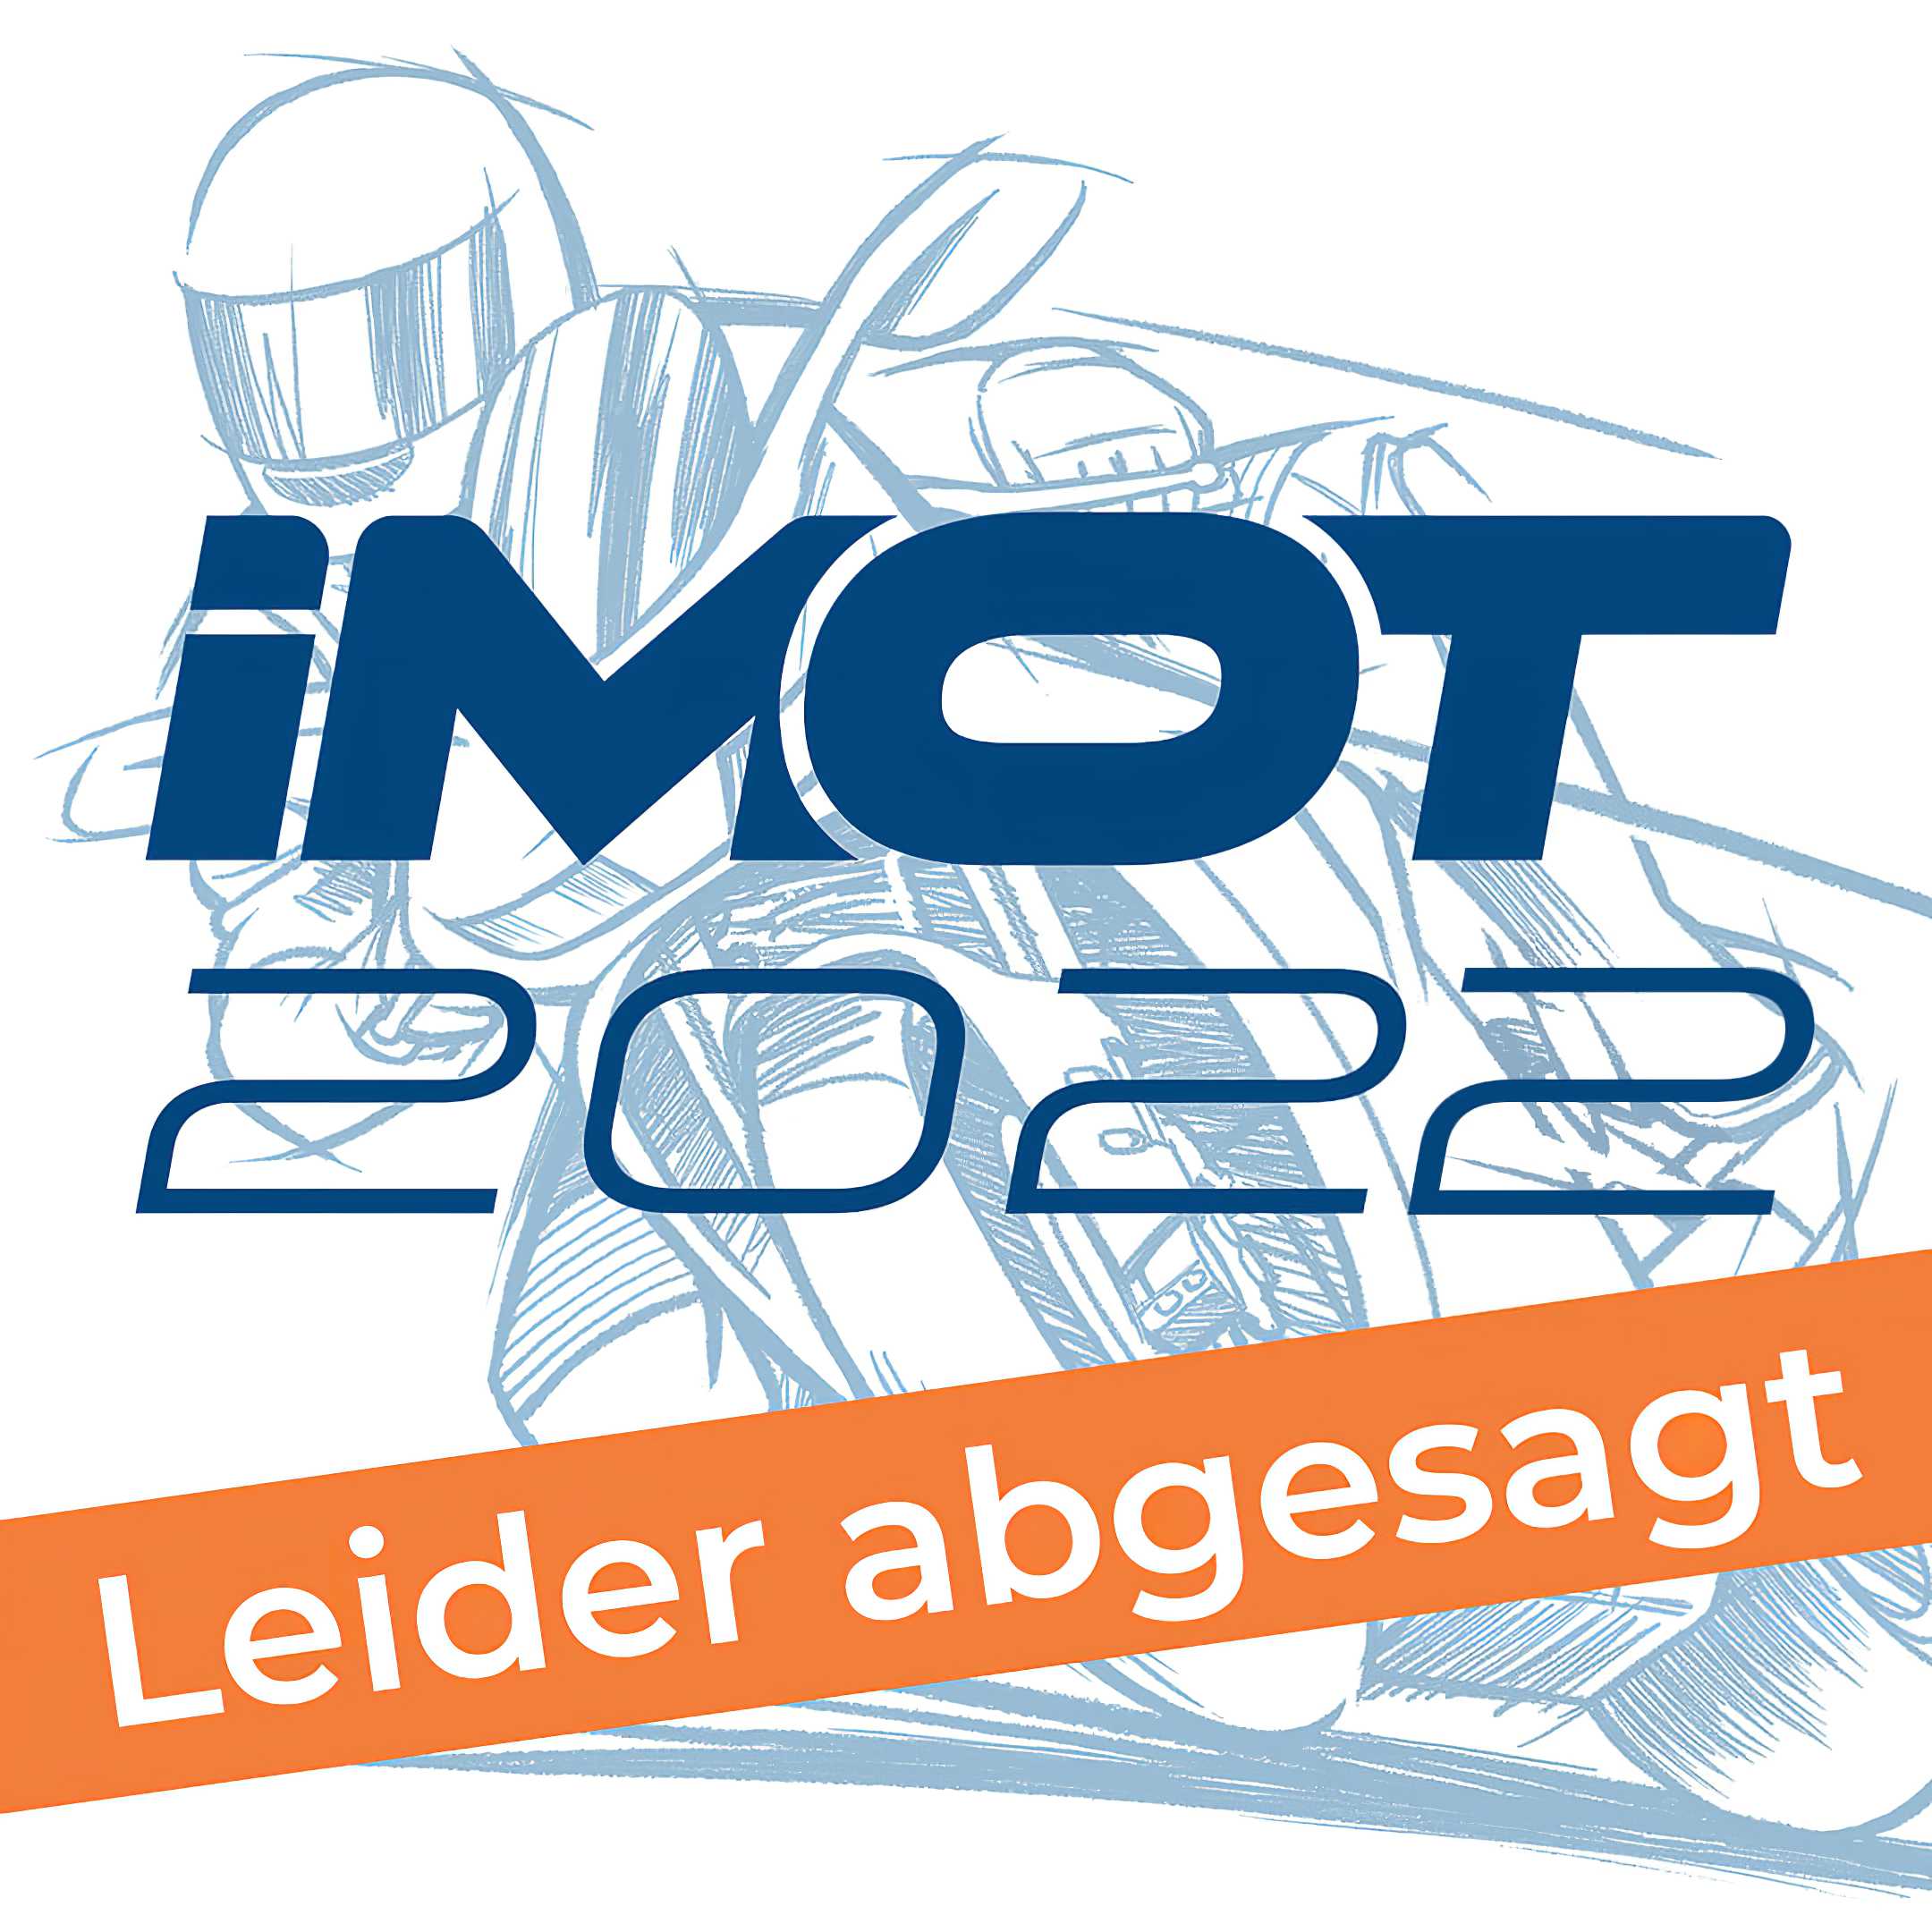 IMOT 2022 cancelled
- also in the MOTORCYCLES.NEWS APP